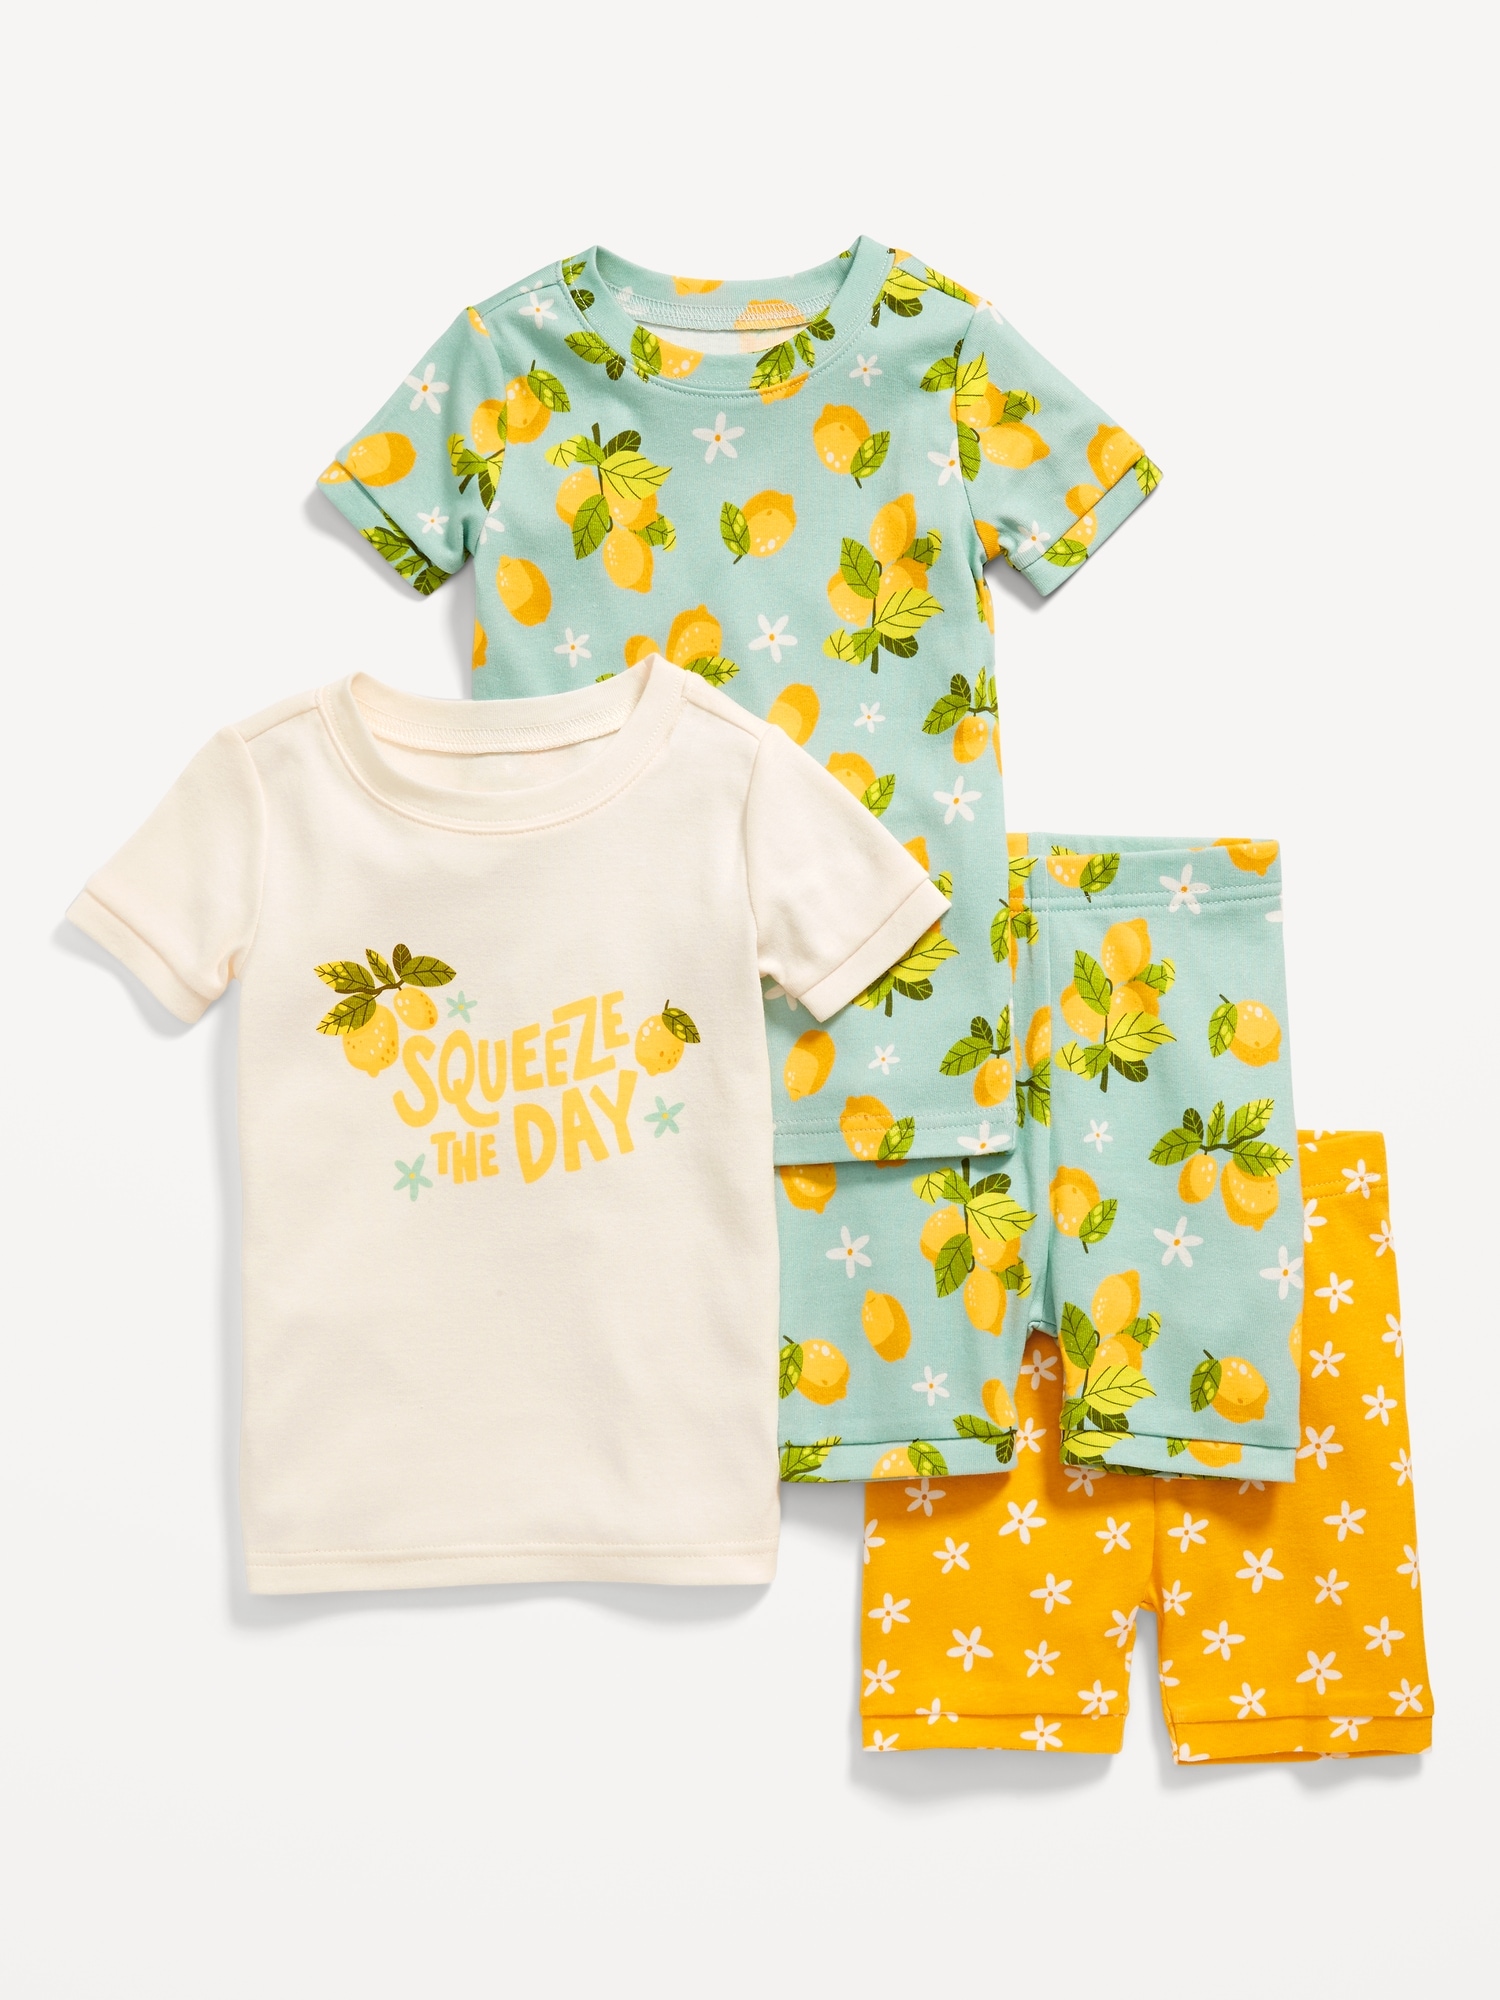 Unisex 4-Piece Printed Snug-Fit Pajama Set for Toddler & Baby Hot Deal